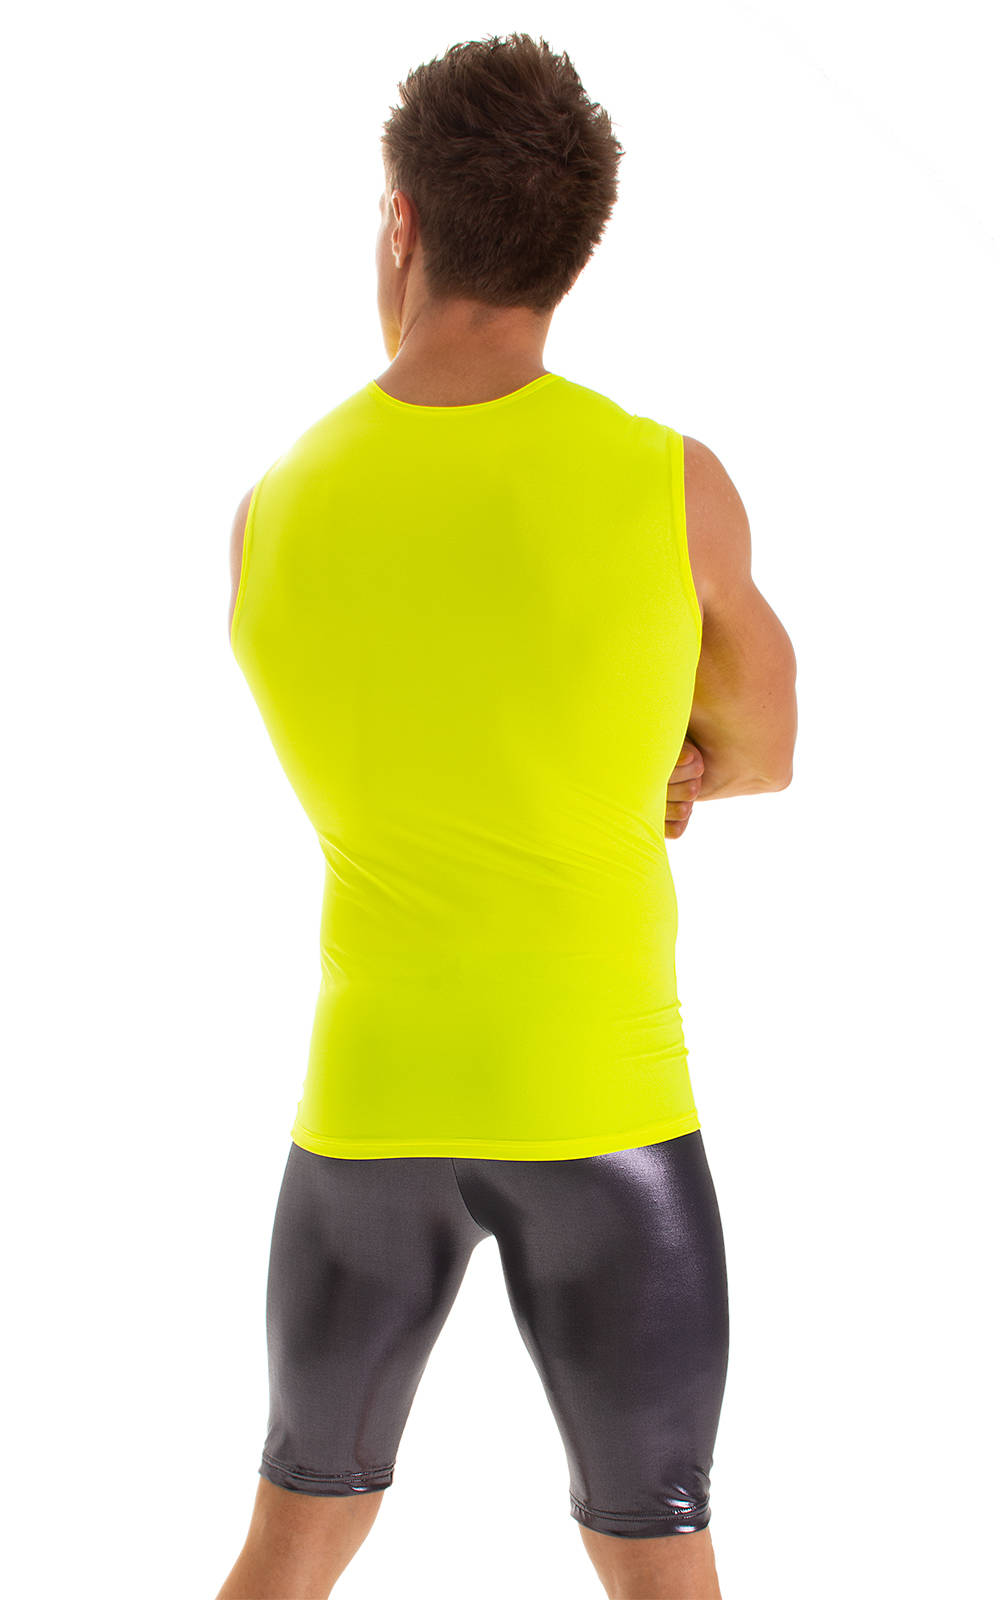 Sleeveless Lycra Muscle Tee in Chartreuse, Rear View